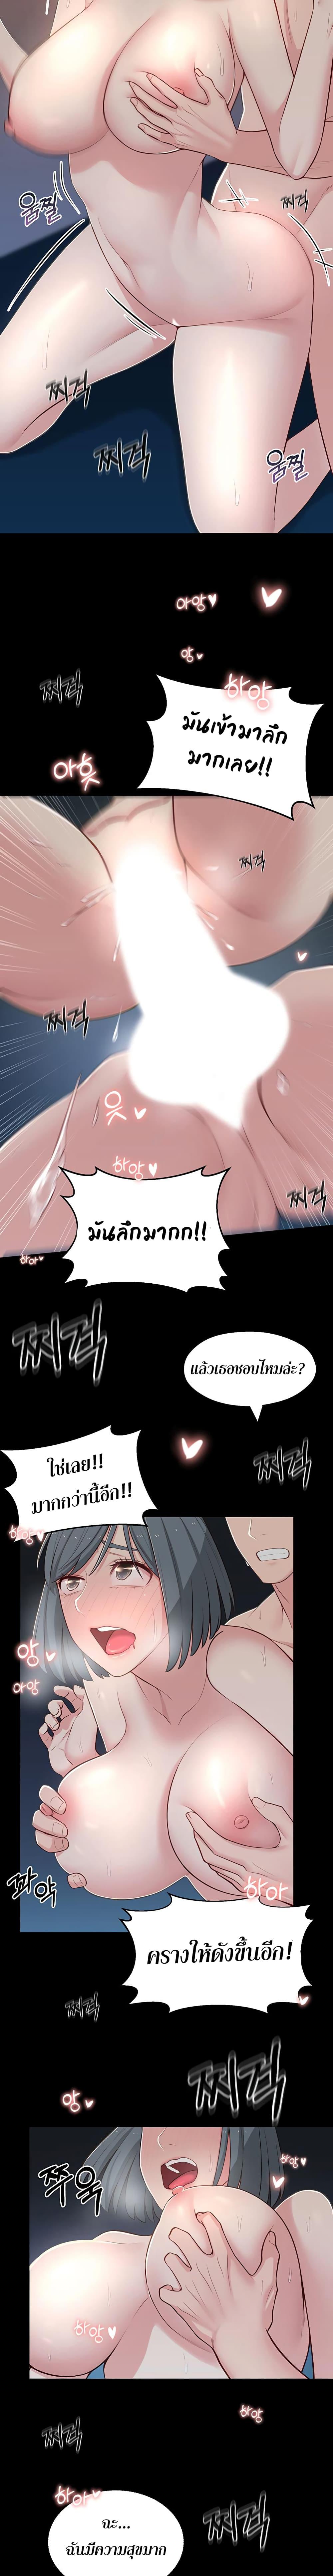 A Knowing Sister 11 ภาพ 16